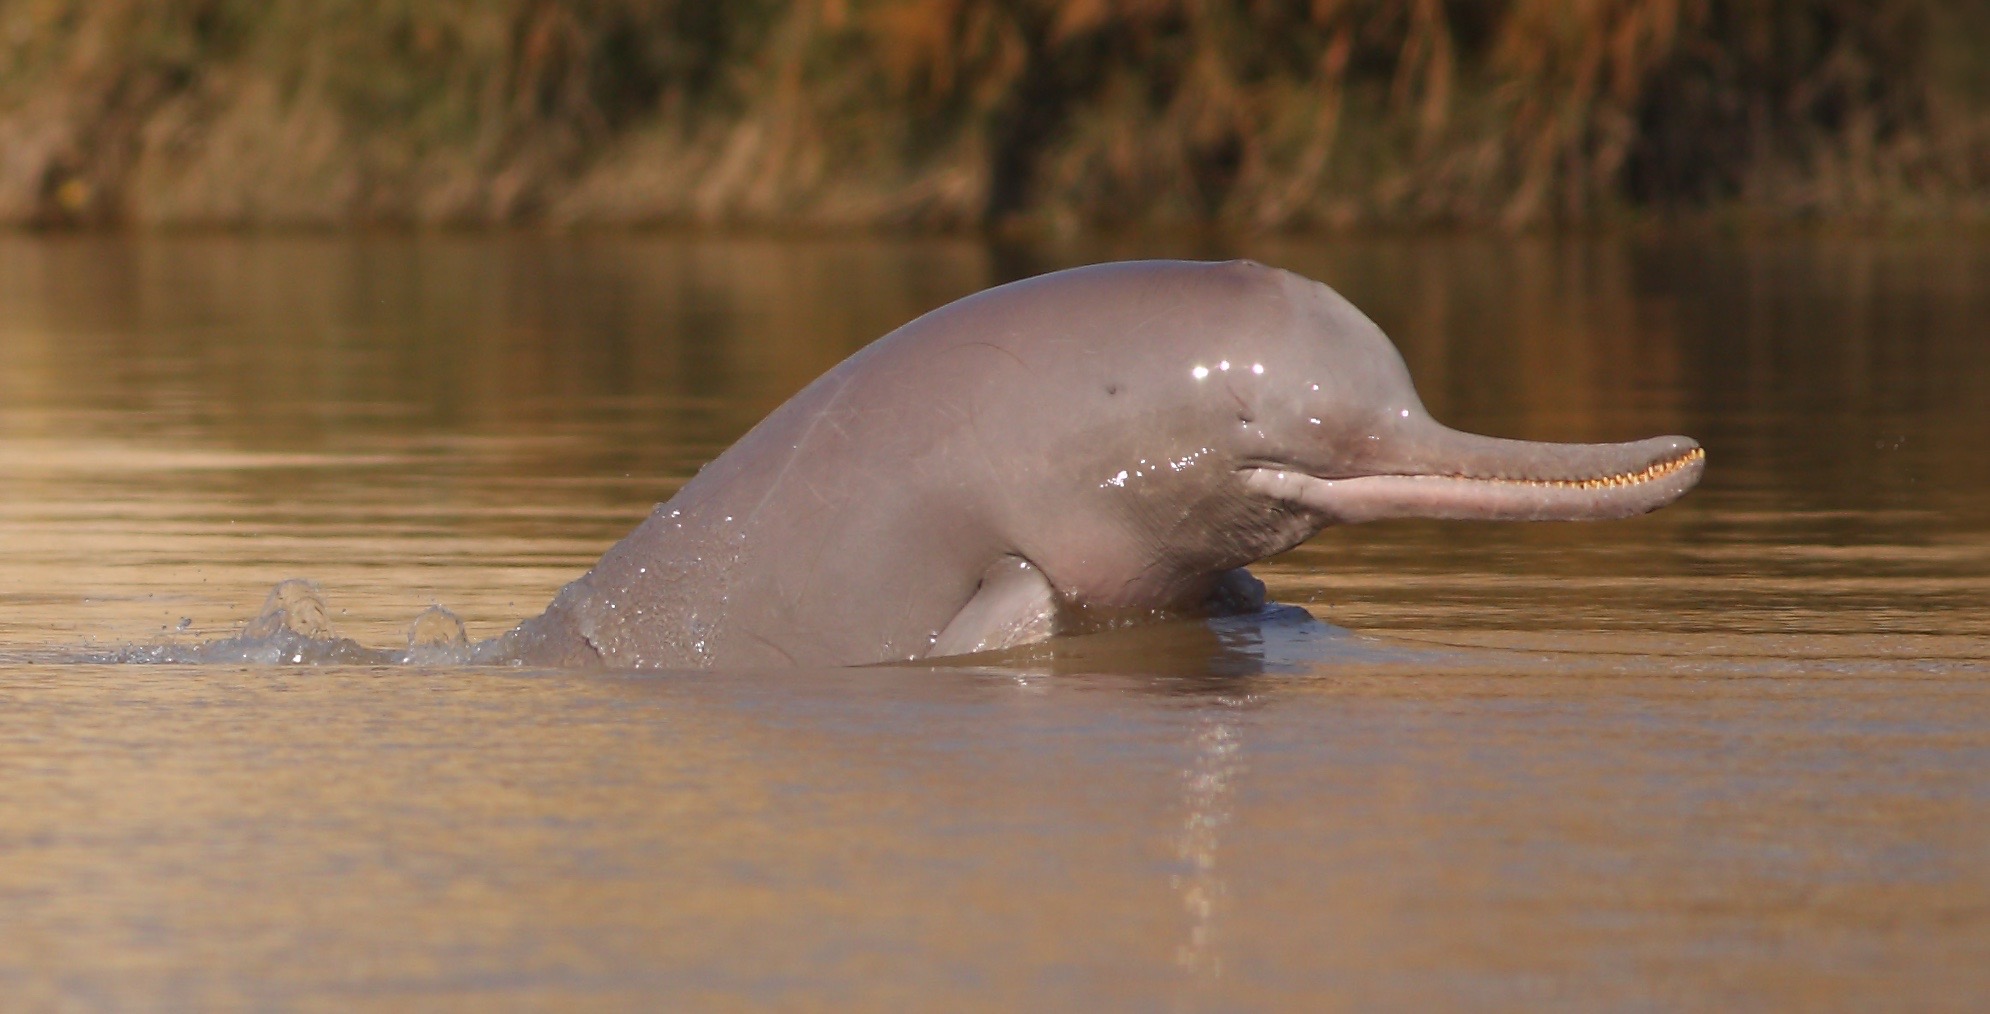 Saving the Indus River dolphin - Asia & Pacific